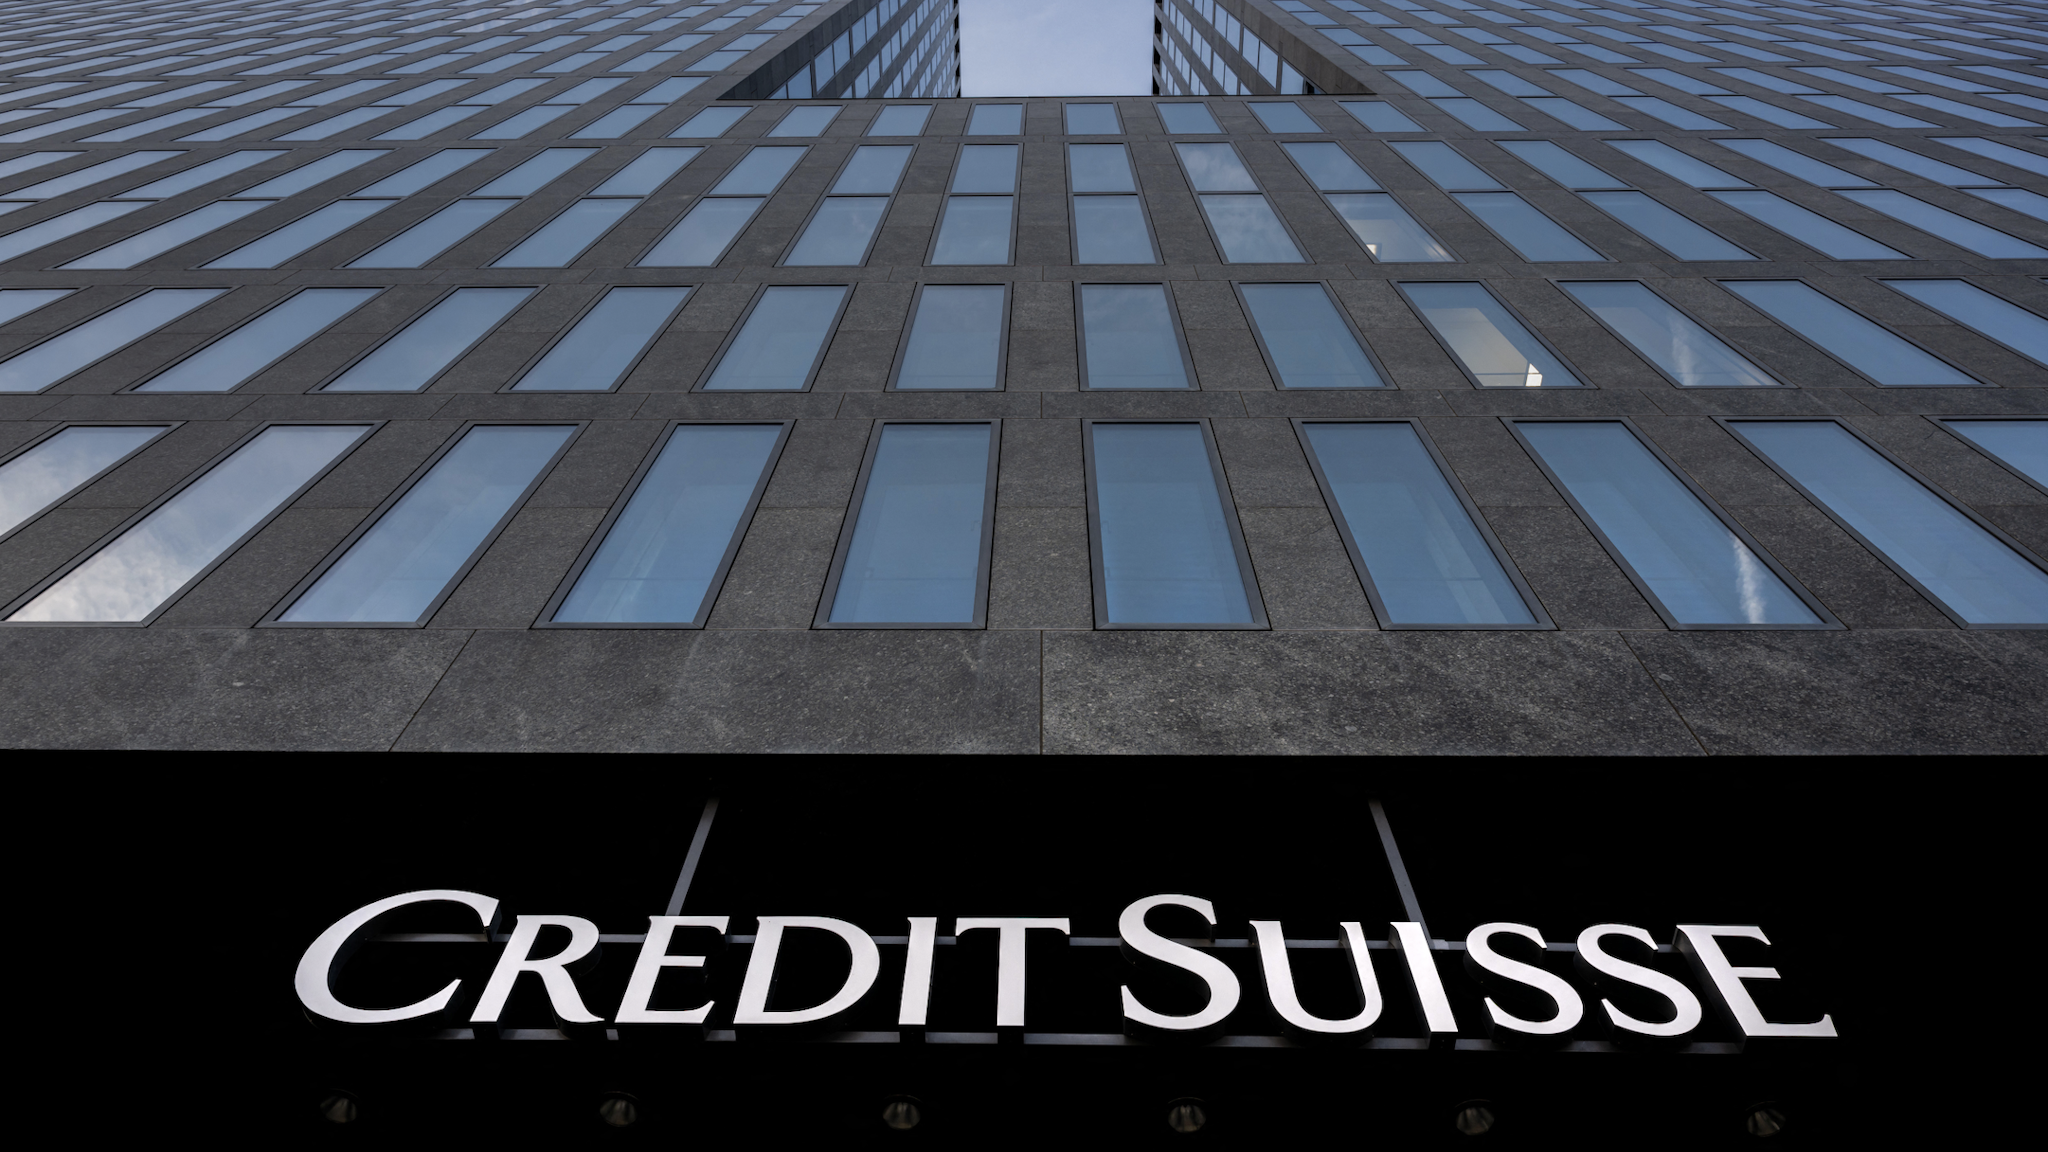 Fears that the U.S. banking crisis could go global widened early Tuesday as lending giant Credit Suisse shares plunged on news its delayed annual report found “material weaknesses” in its balance sheet over the last two years.